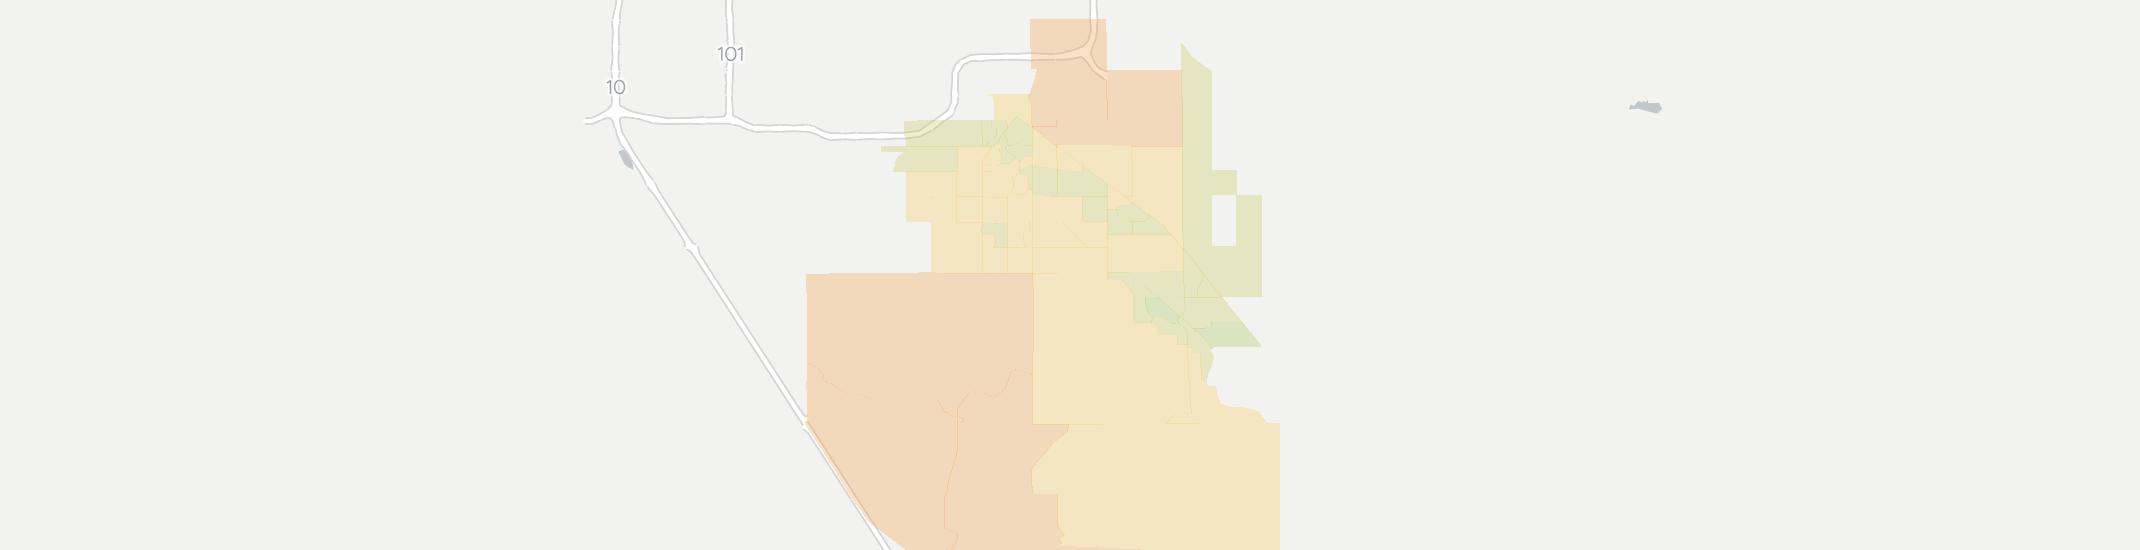 Queen Creek Internet Competition Map. Click for interactive map.